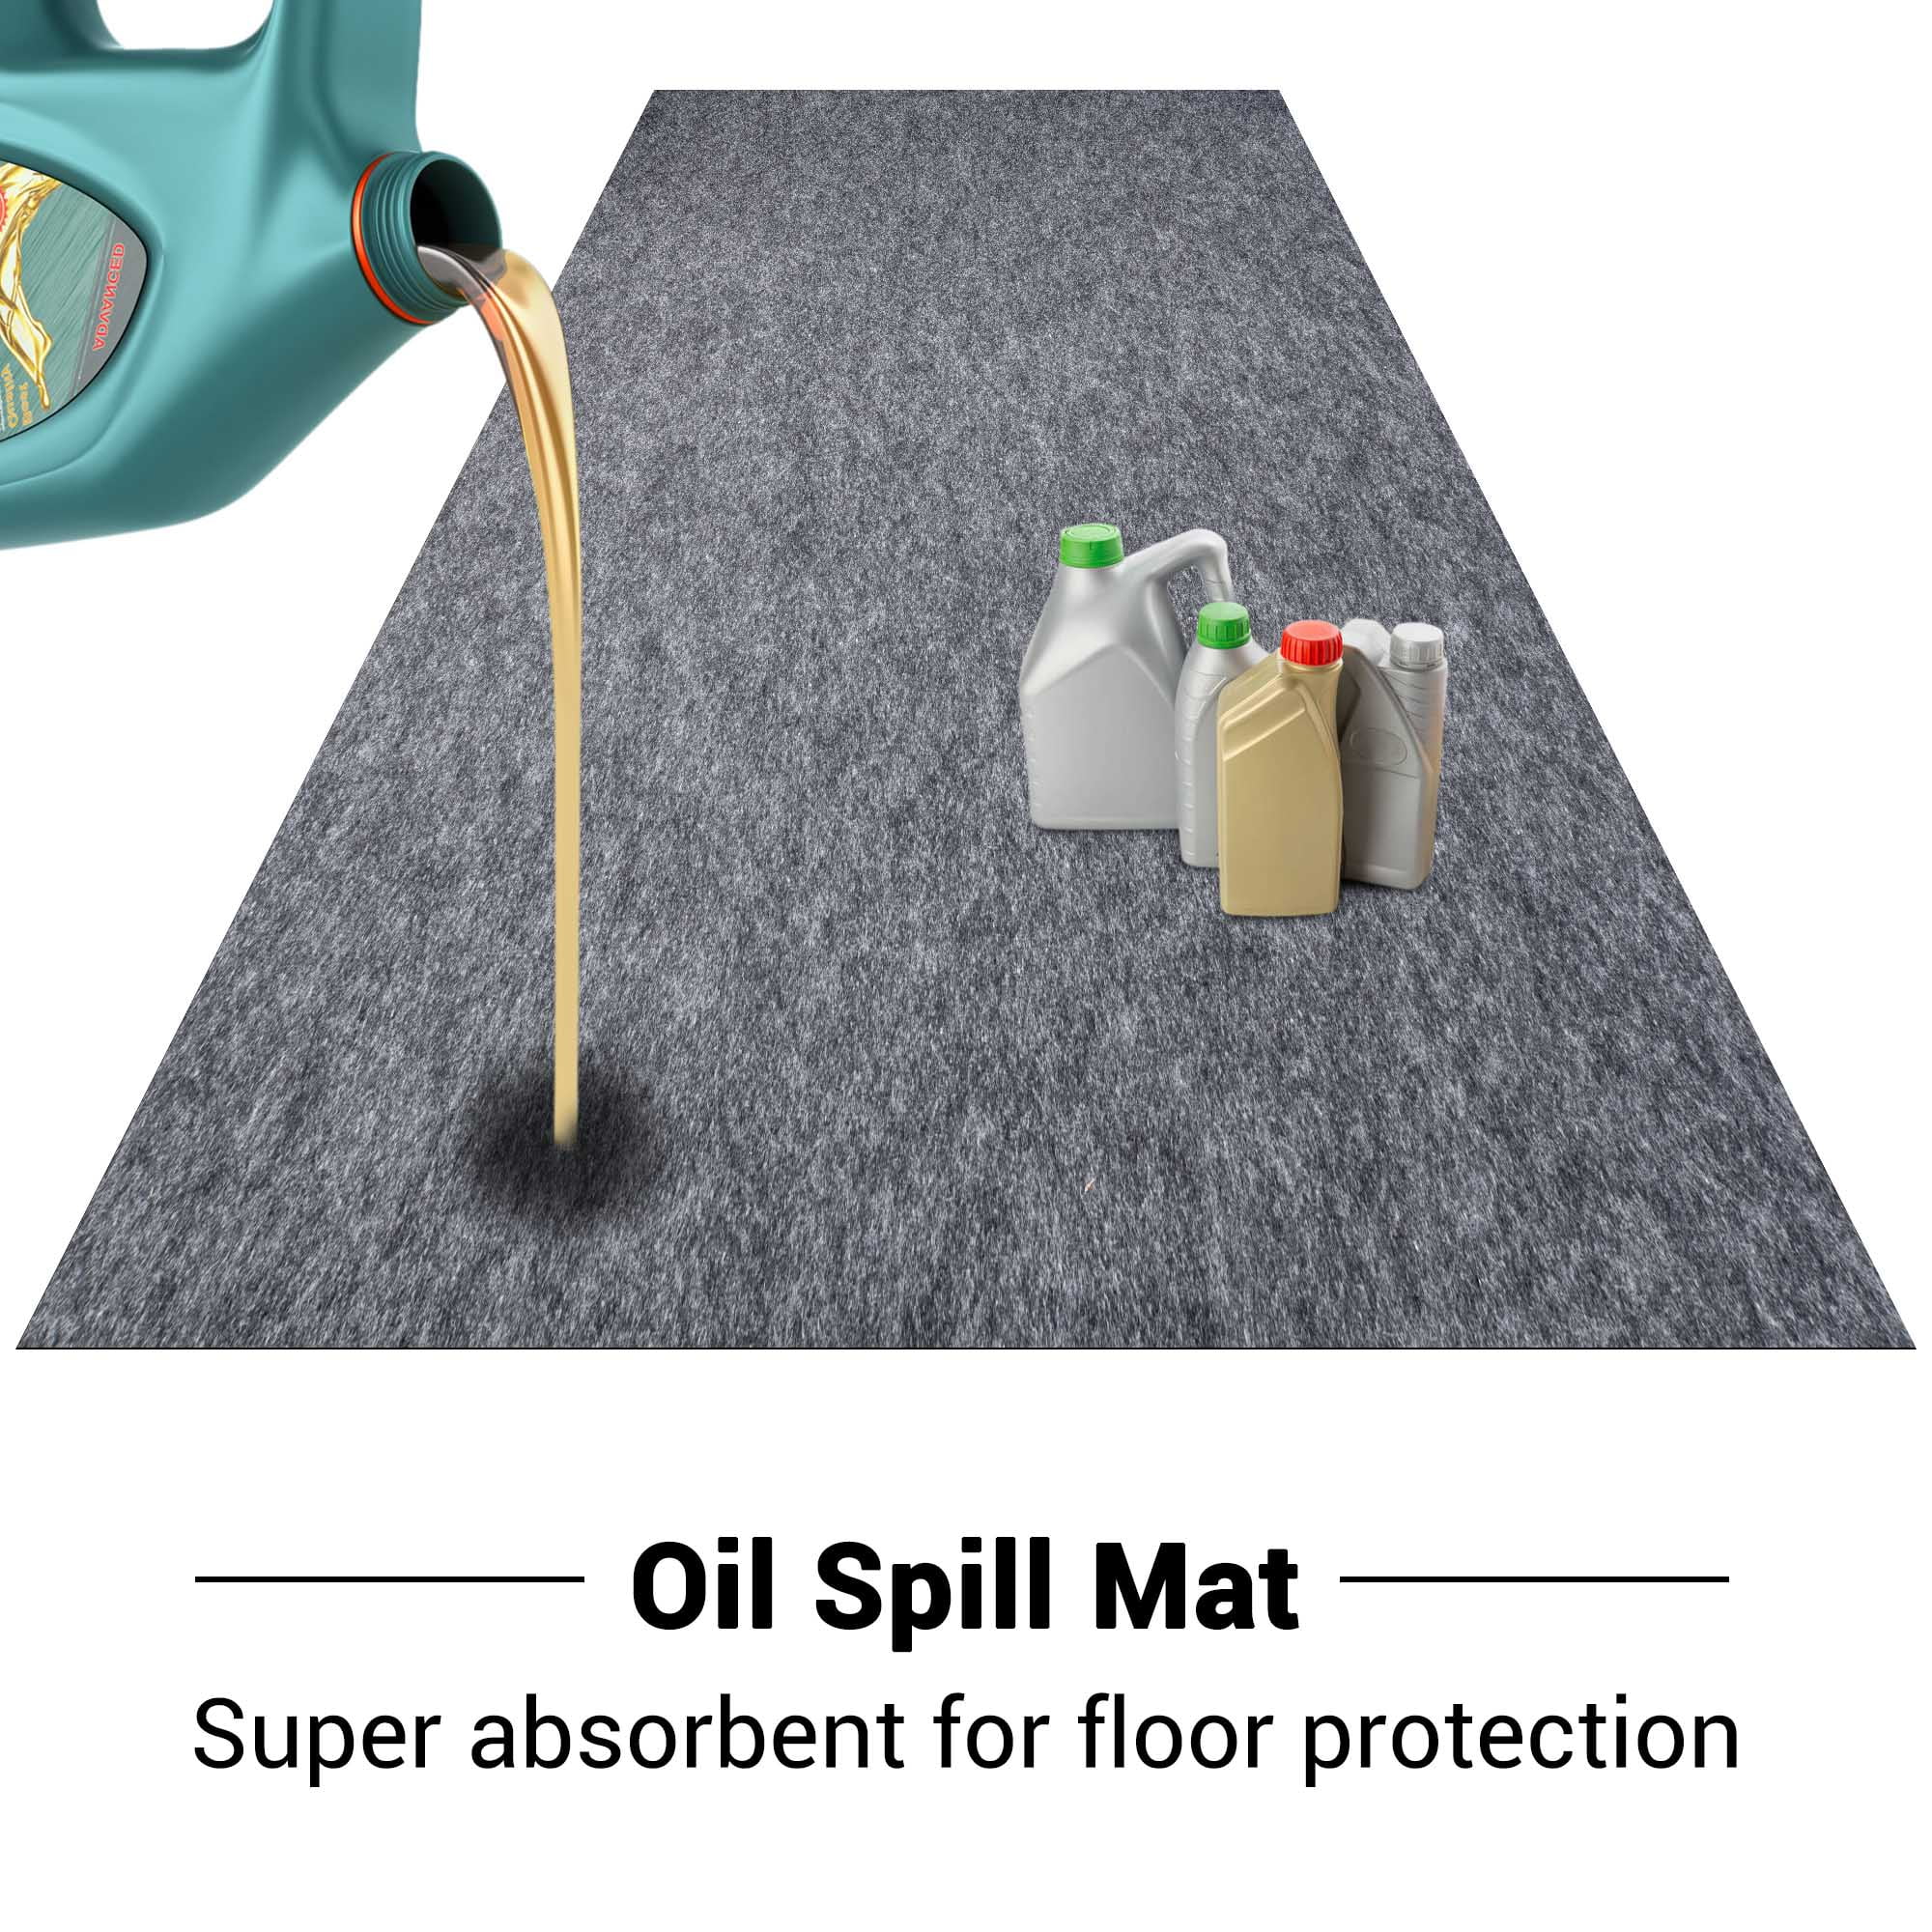  KALASONEER Oil Spill Mat,Absorbent Oil Mat Reusable  Washable,Contains Liquids, Protects Driveway Surface,Garage or  Shop,Parking,Floor(36inches x 36inches) : Automotive